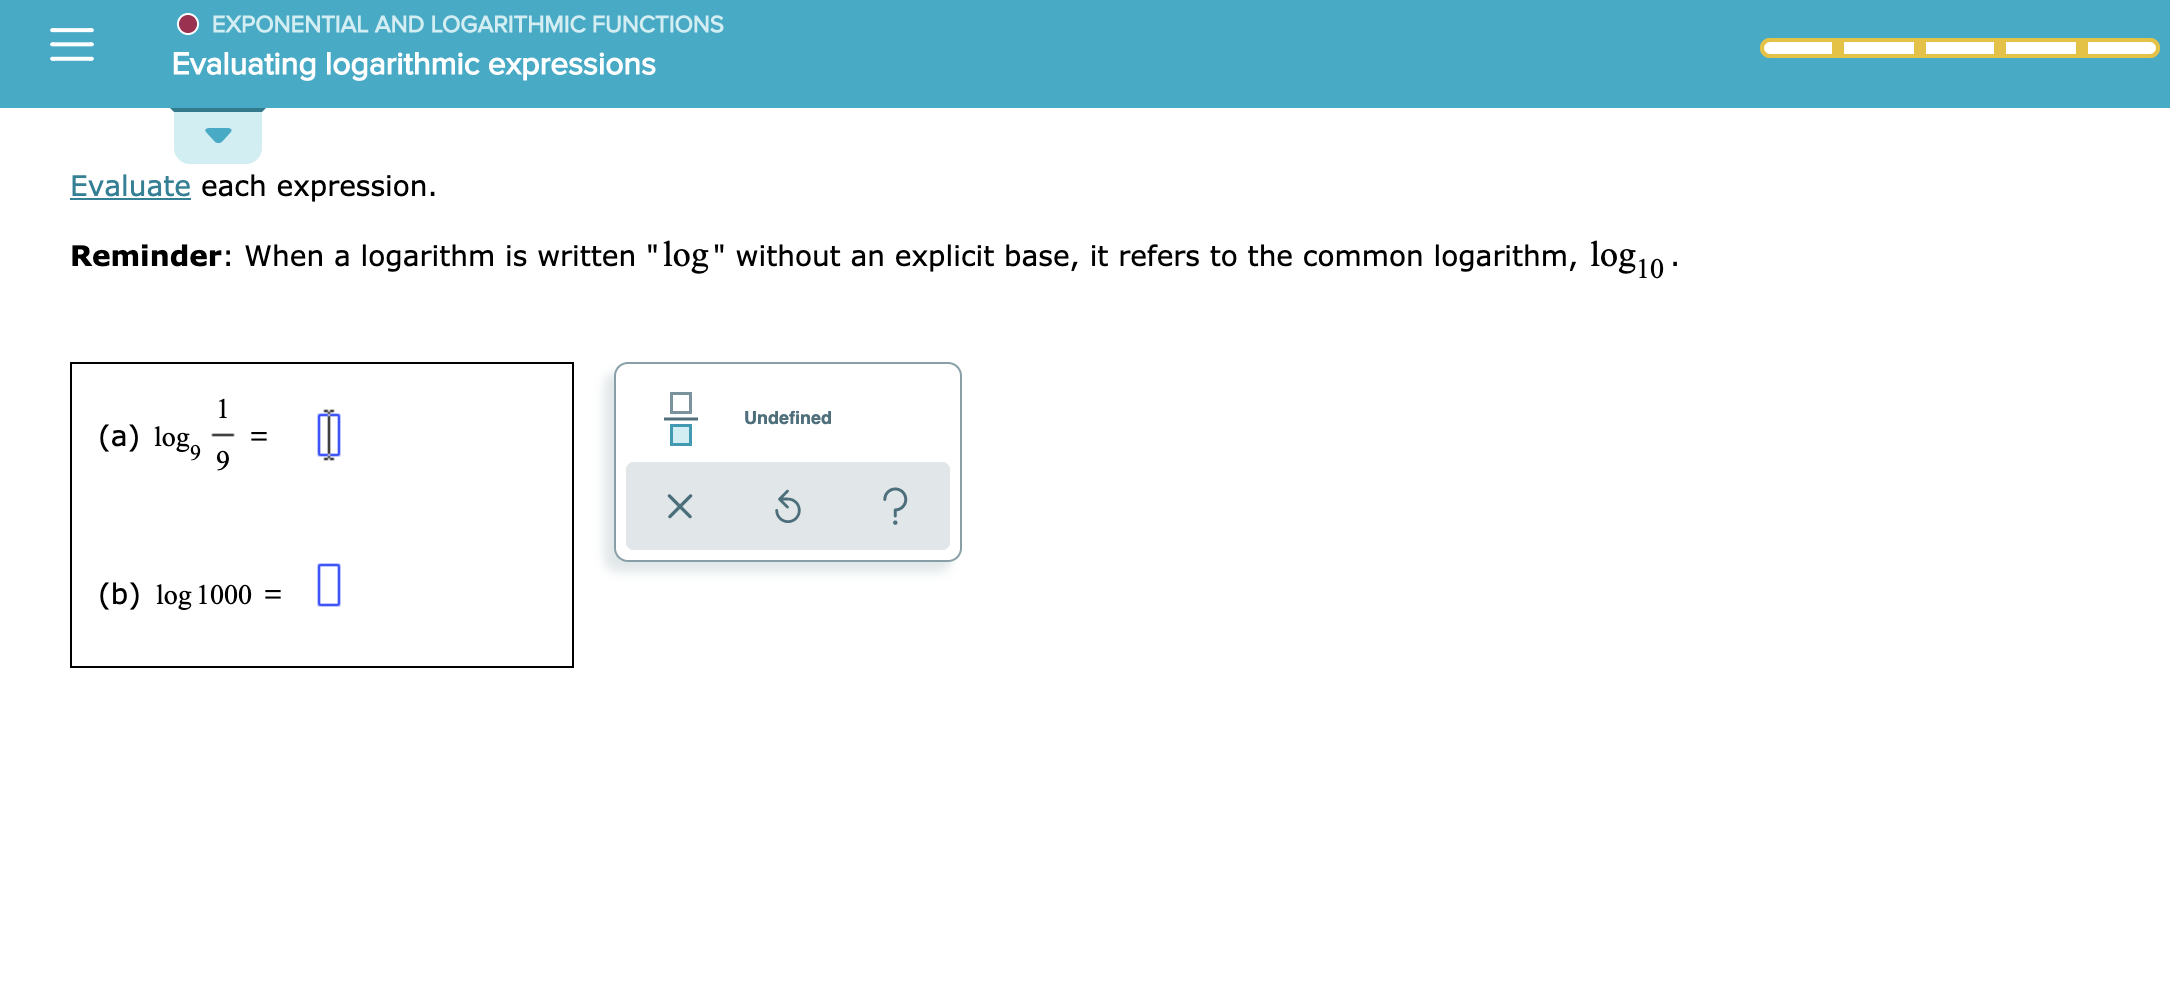 EXPONENTIAL AND LOGARITH MIC FUNCTIONS
Evaluating logarithmic expressions
Evaluate each expression
Reminder: When a logarithm is written "log" without an explicit base, it refers to the common logarithm, log1n
1
Undefined
(a) log
9
?
X
(b) log 1000 U
